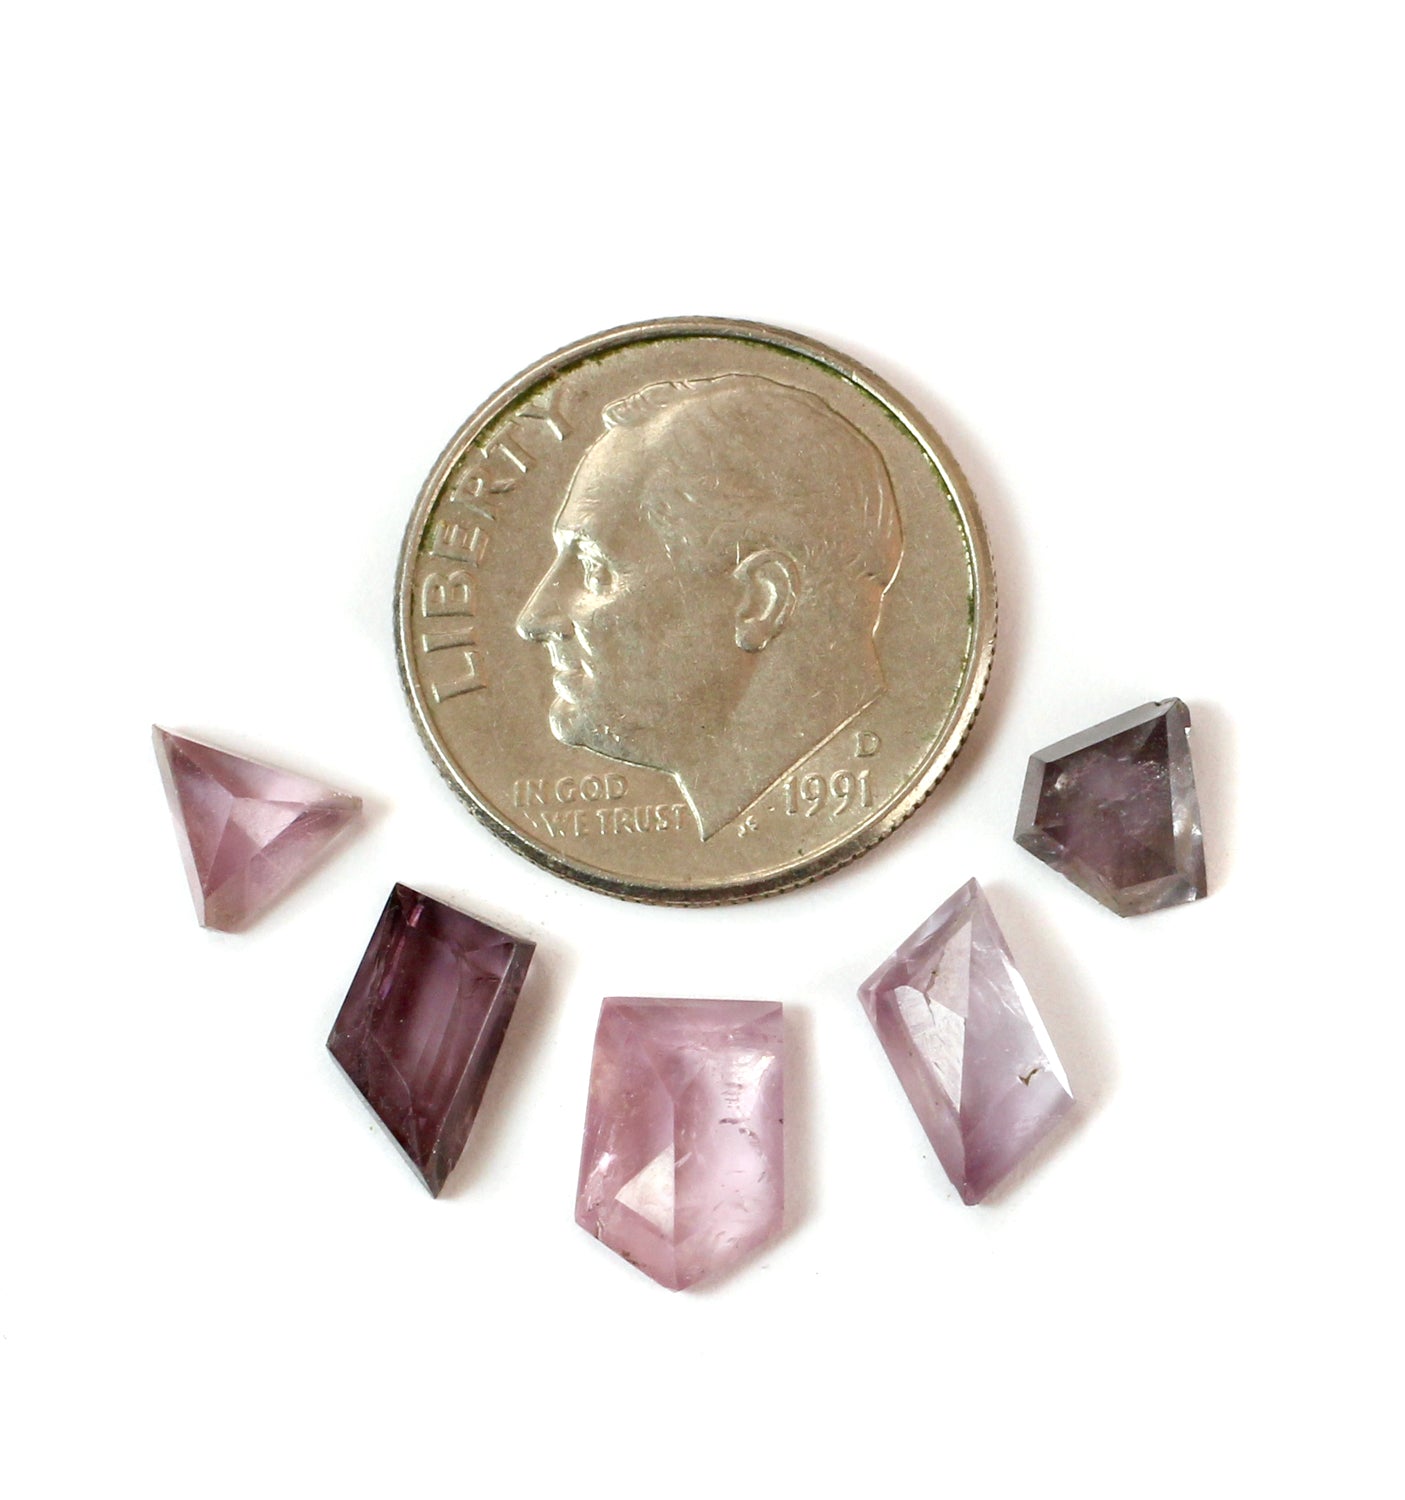 Spinel Collection - Lot 3